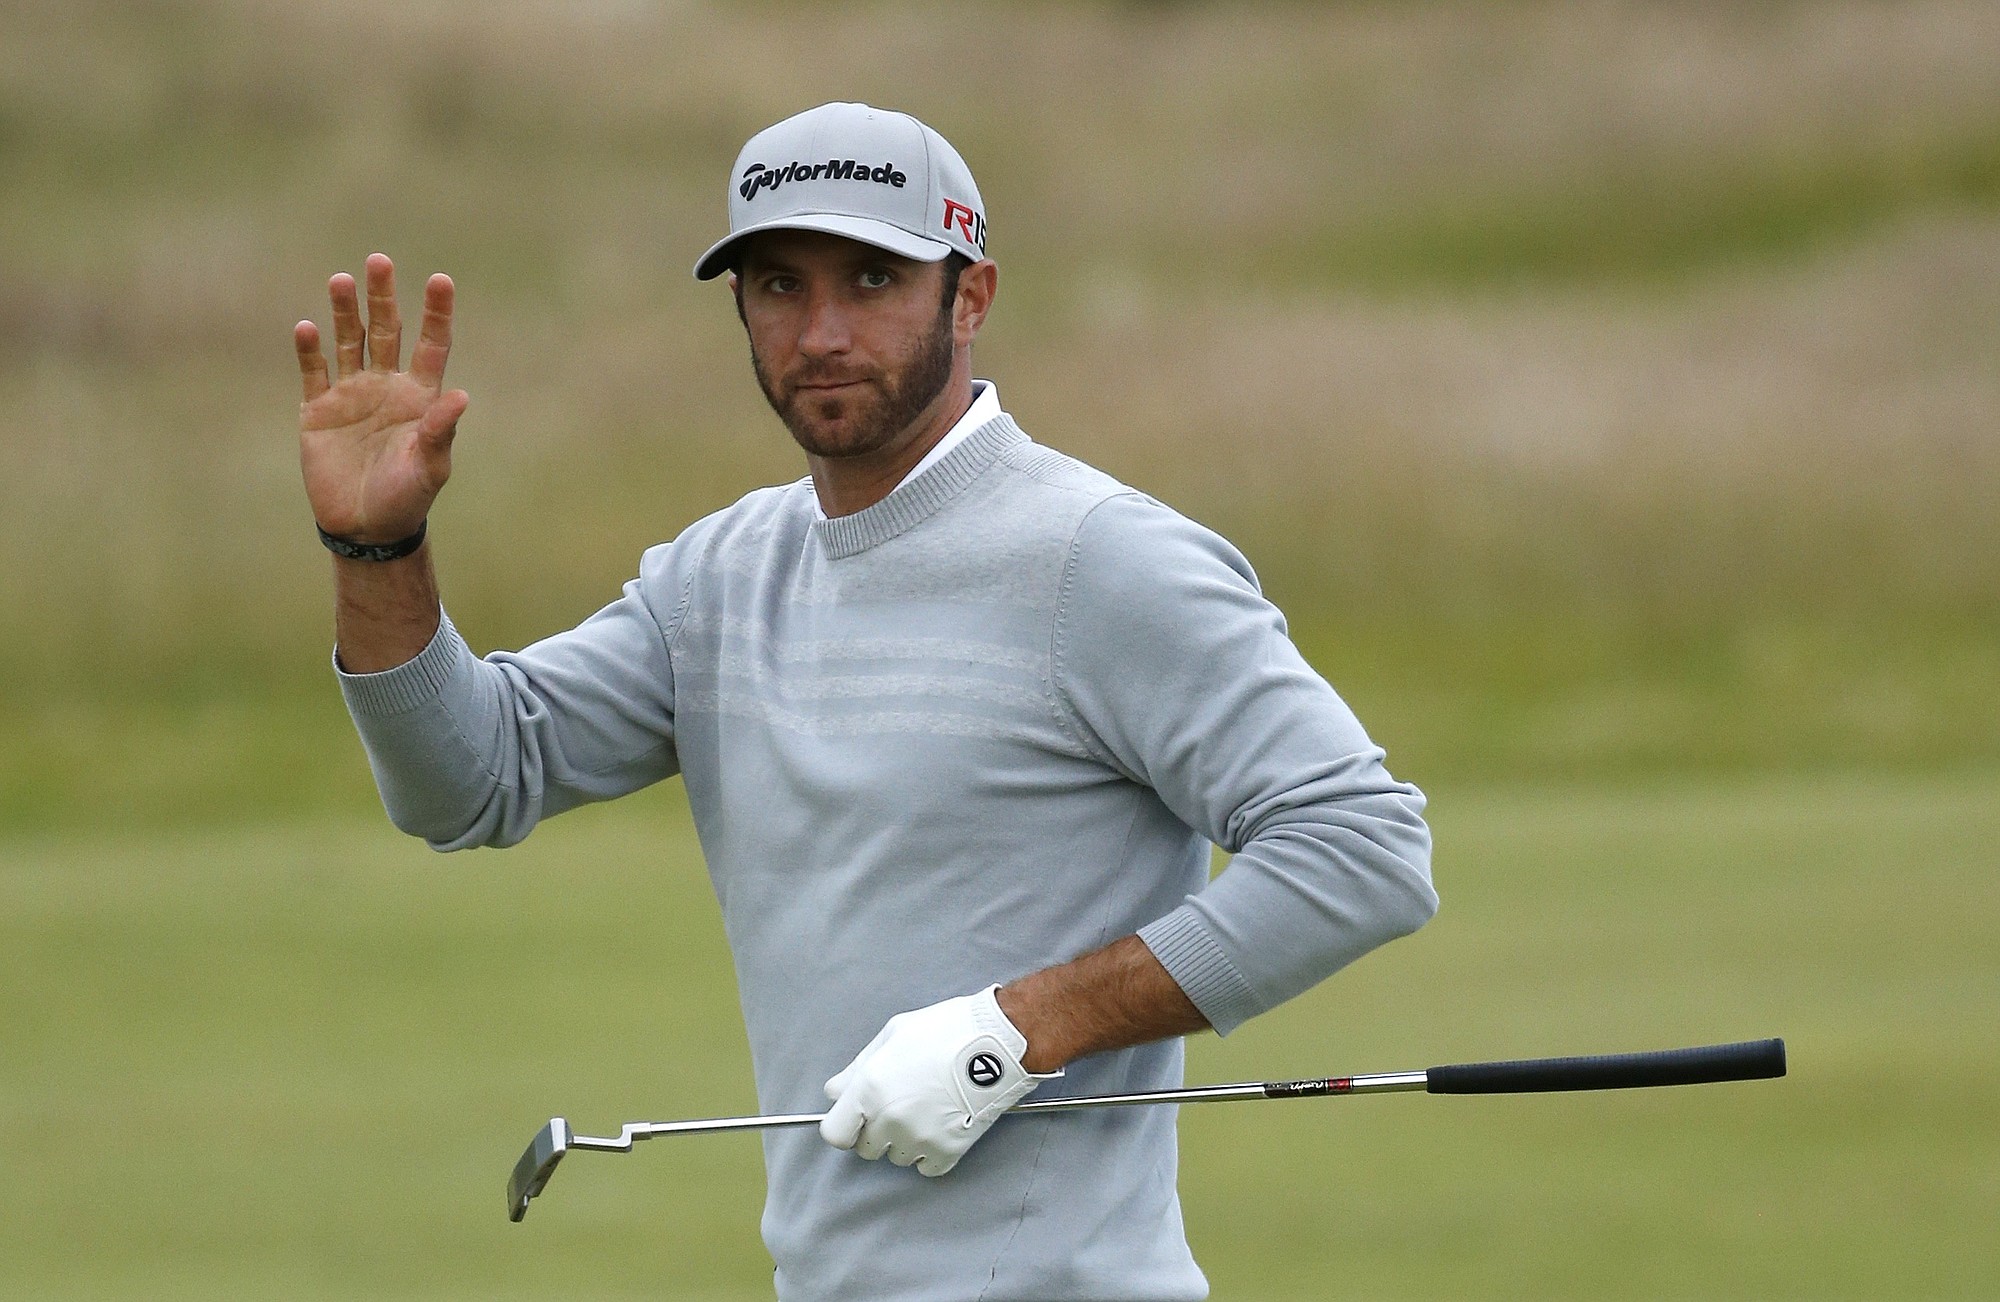 United States? Dustin Johnson waves after making a putt on the 10th green during the second round of the British Open Golf Championship at the Old Course, St. Andrews, Scotland, Friday, July 17, 2015.